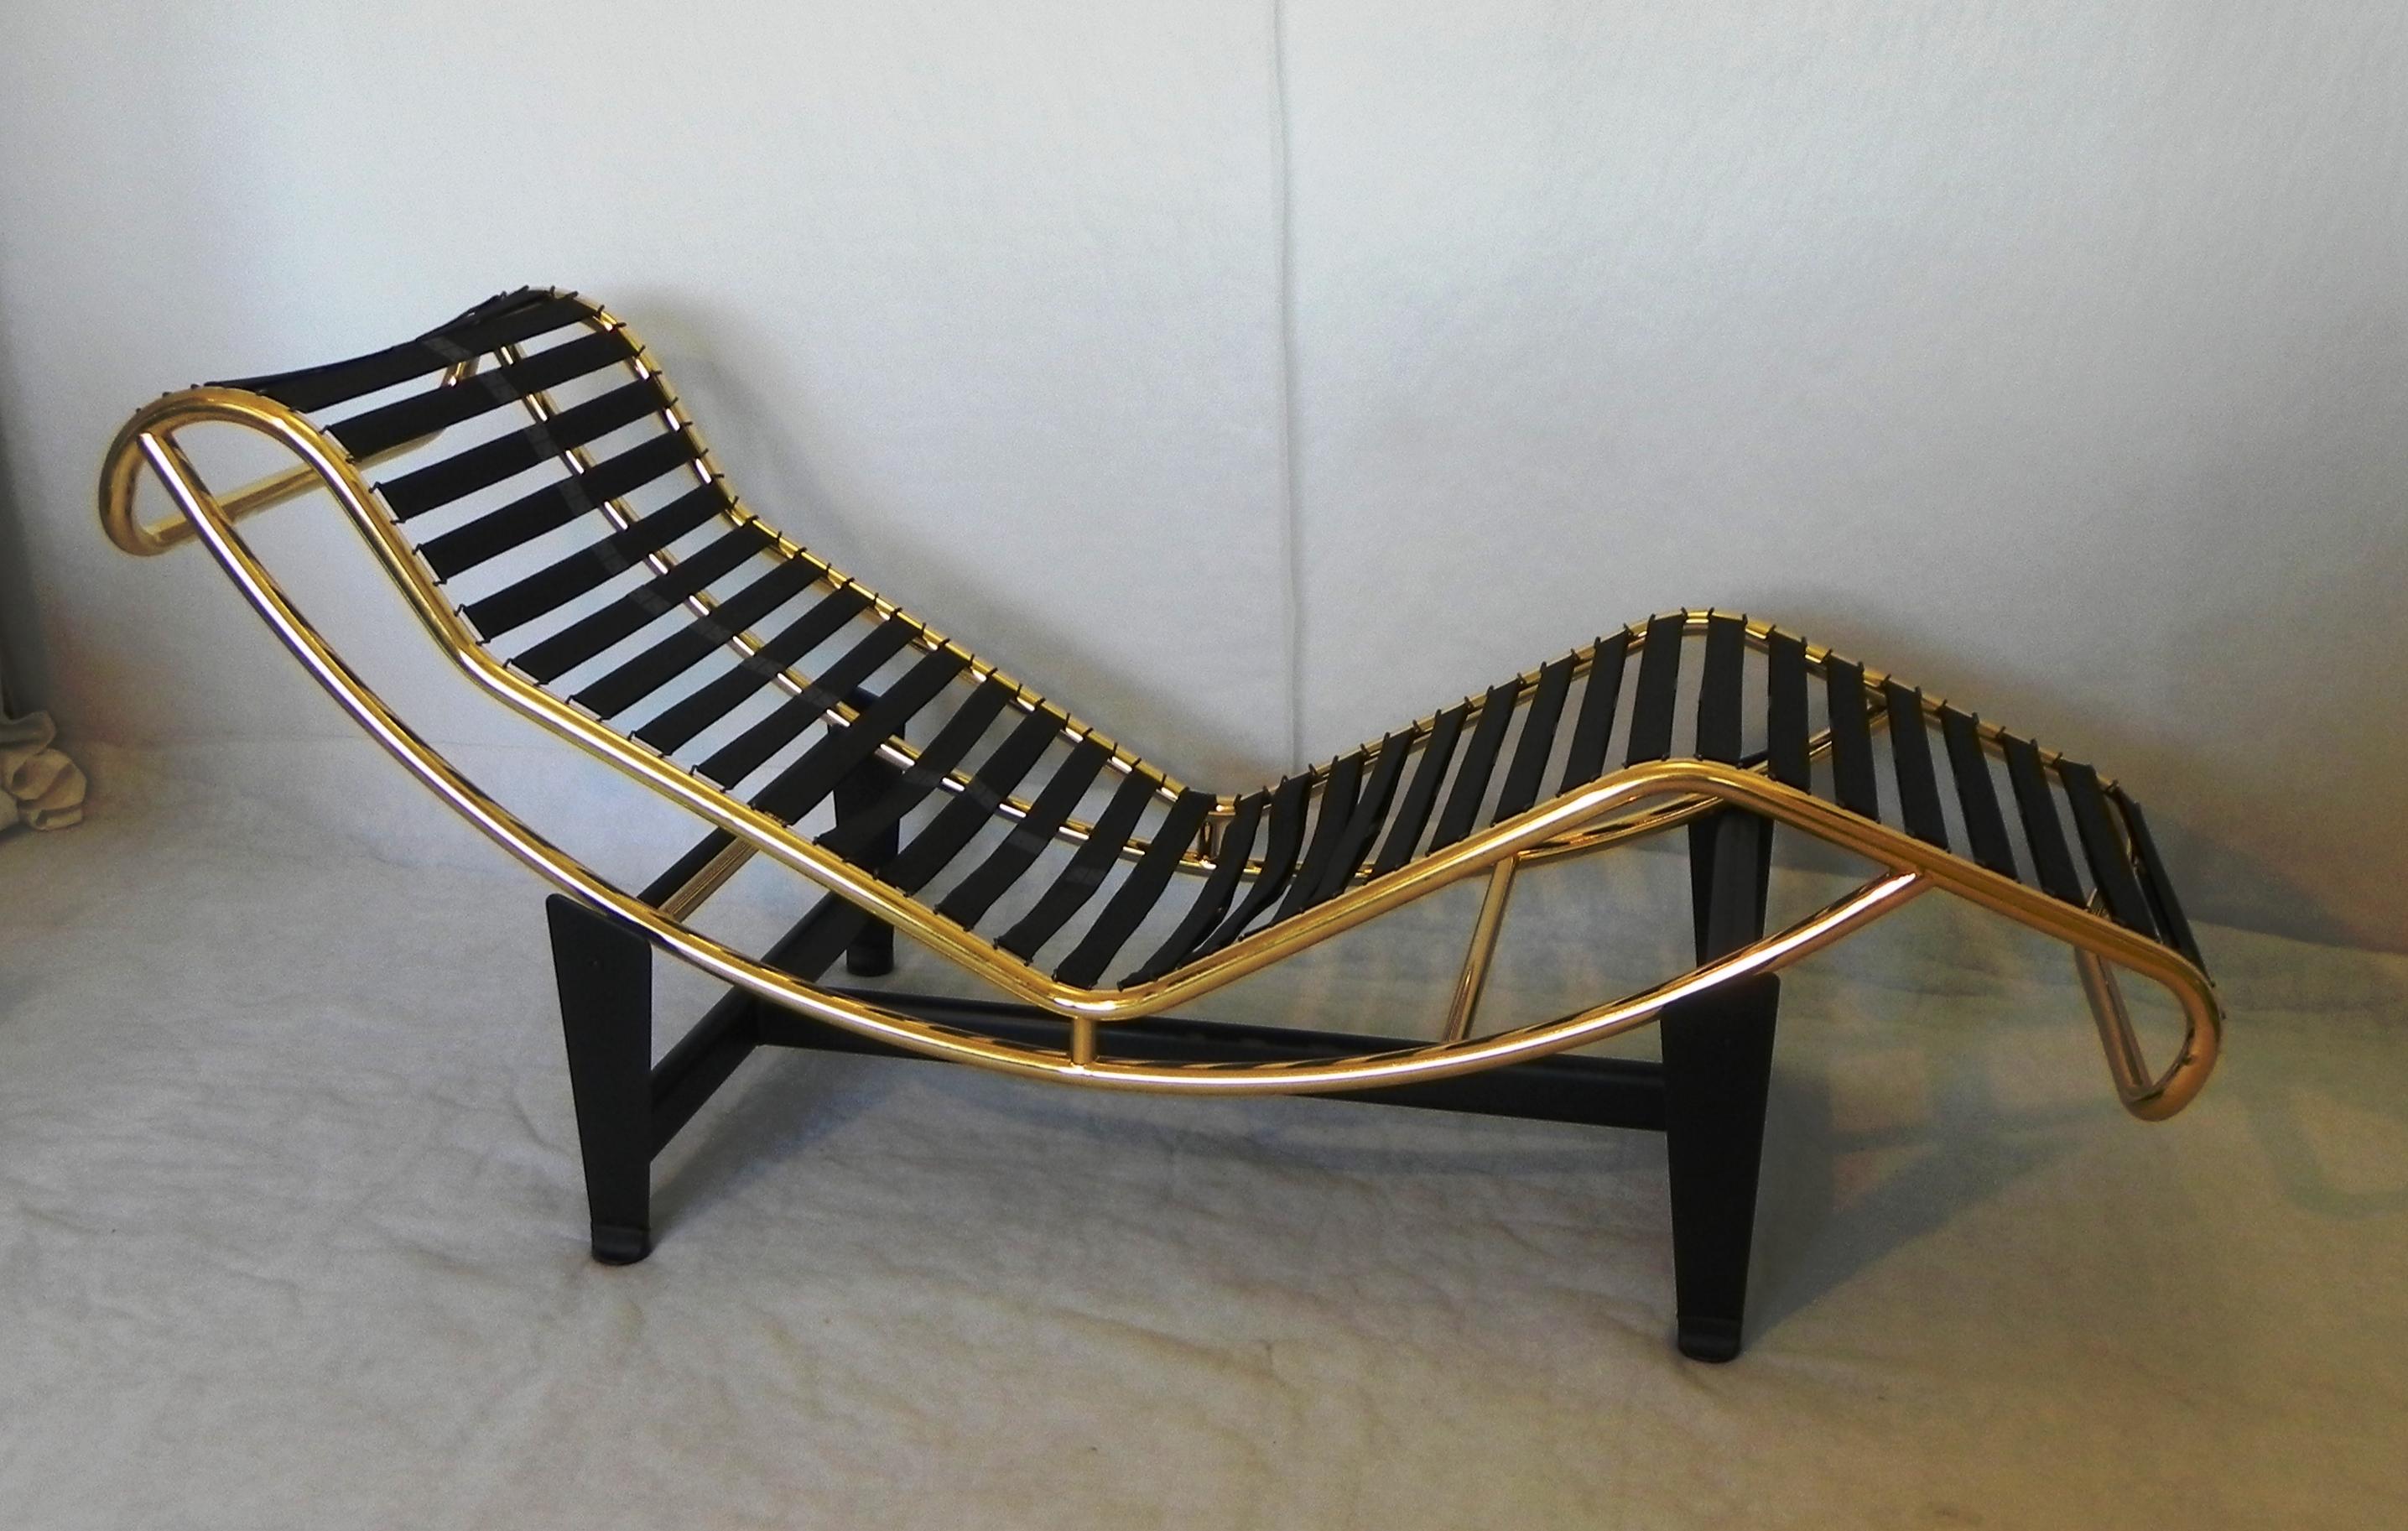 European Chaise Longue, limited edition - Gold For Sale